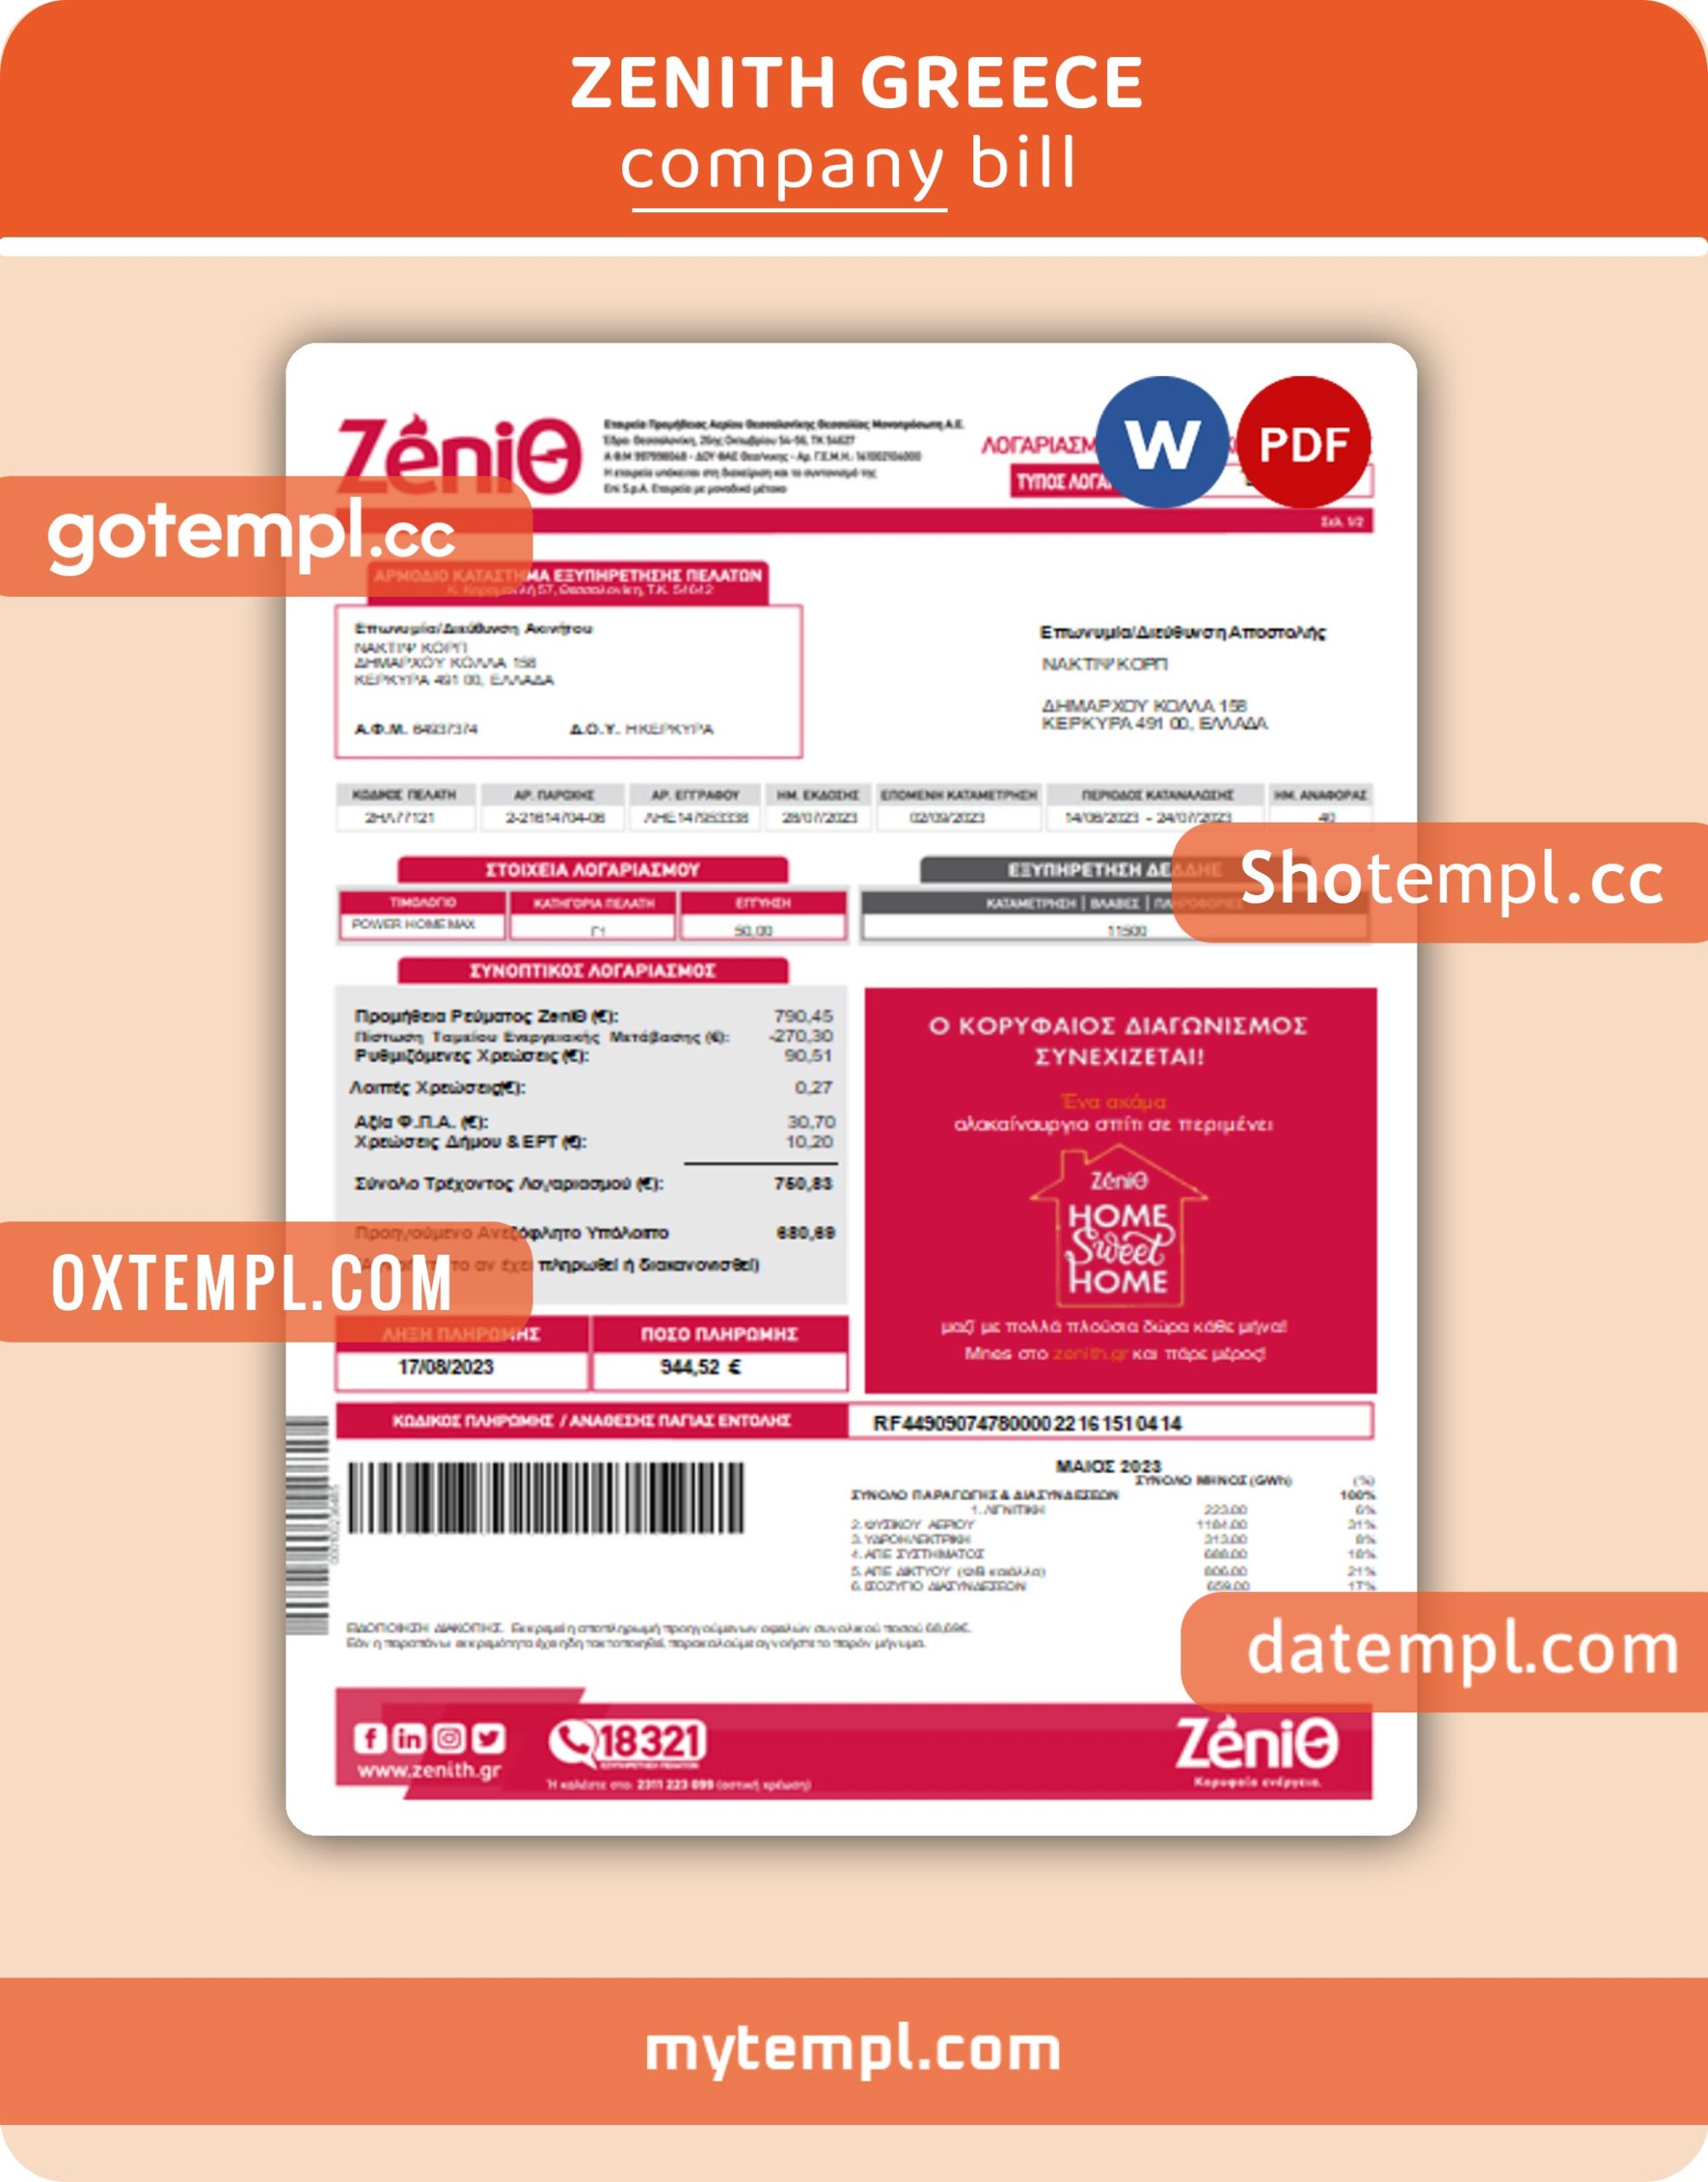 Zenith GreeceÂ business utility bill, Word and PDF template, 4 pages, version 3